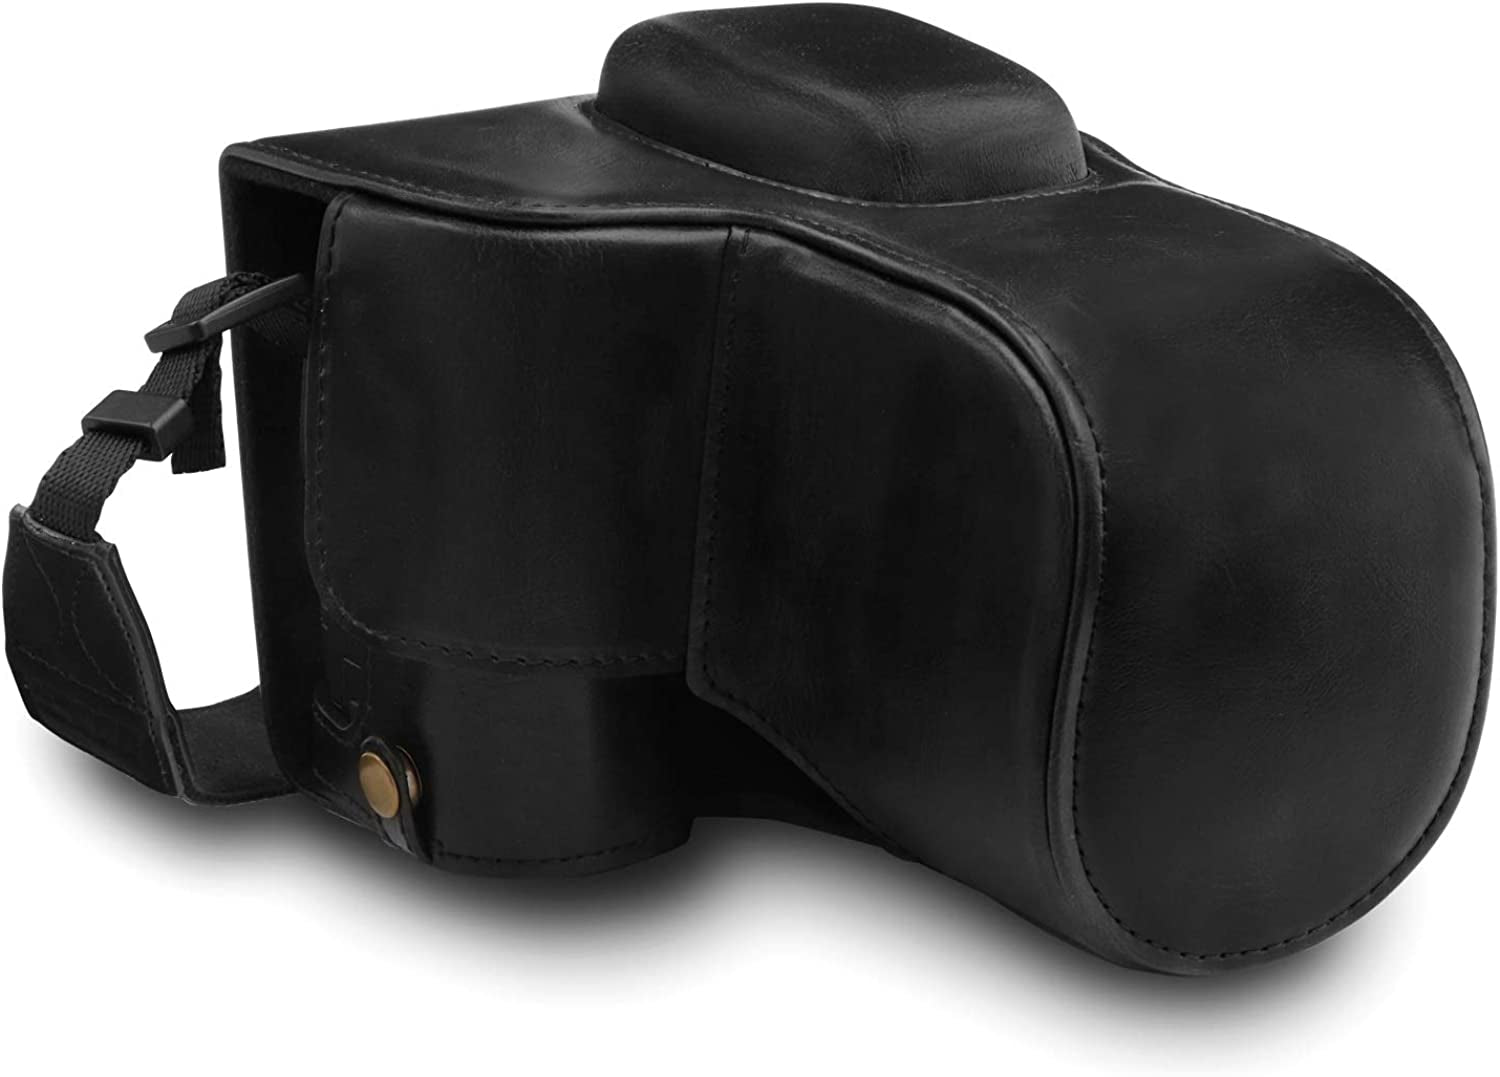 Leather Camera Half Case Compatible with Nikon Coolpix P1000